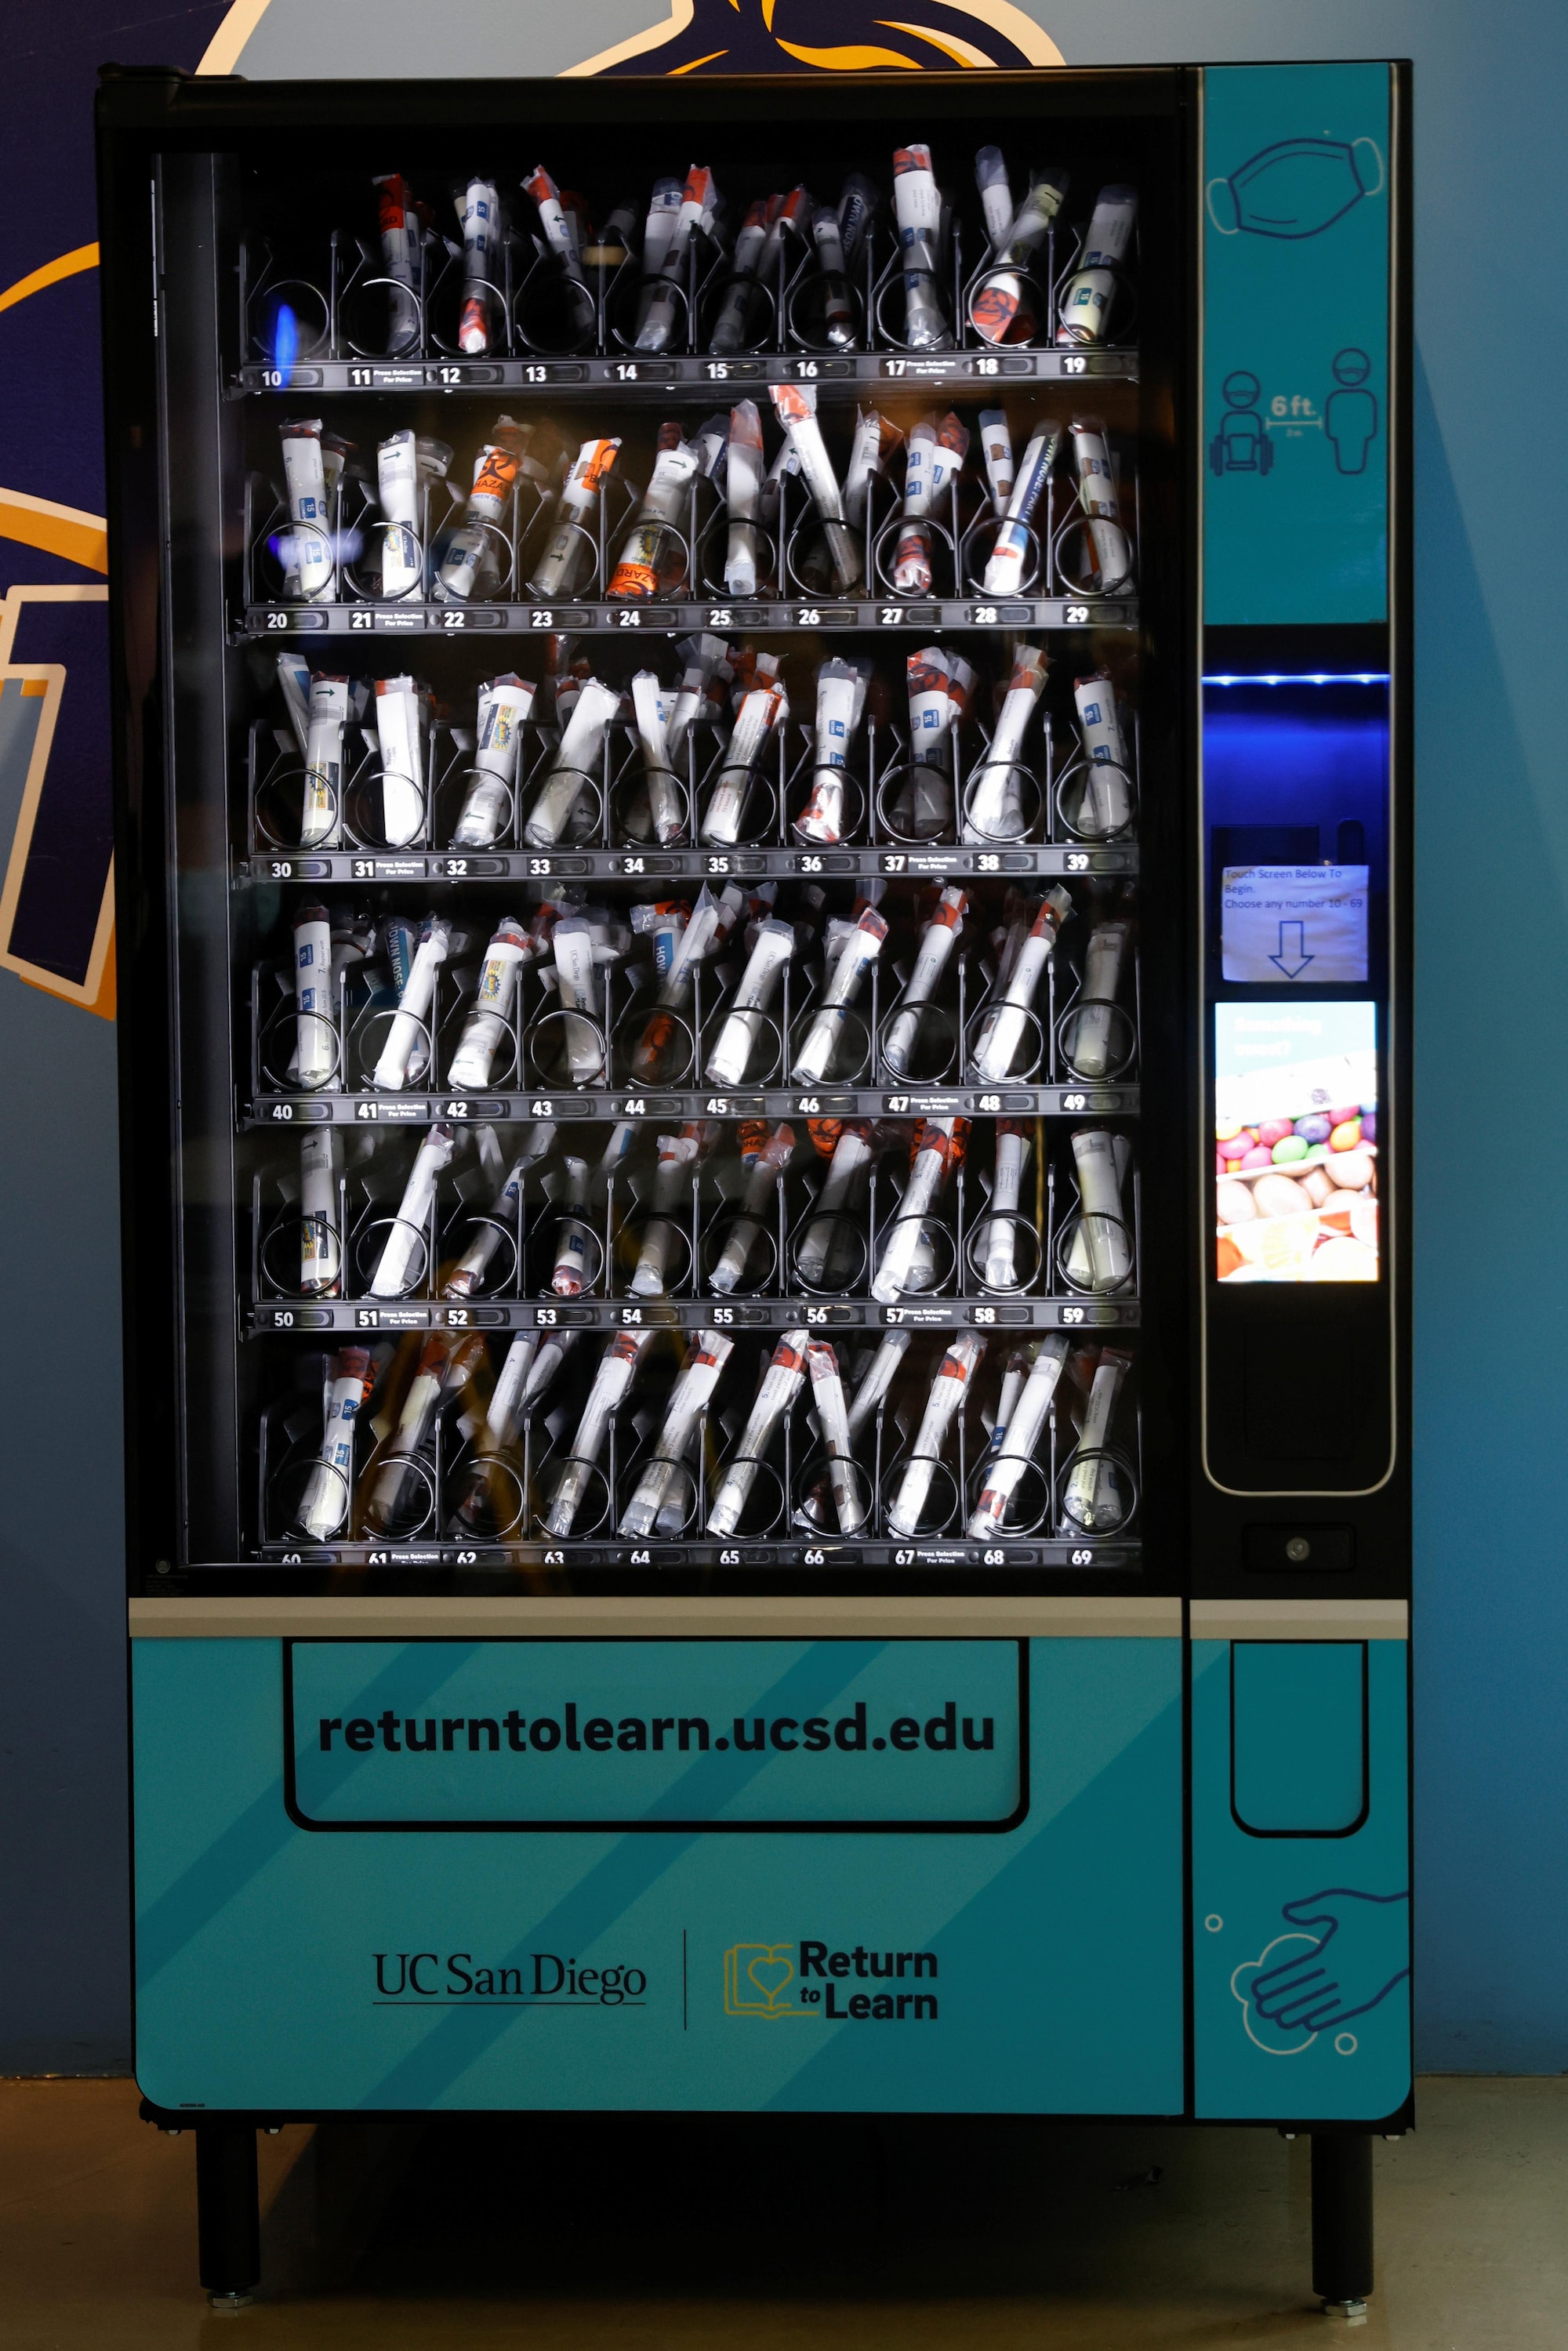 UC San Diego offers students COVID test kits by vending machine